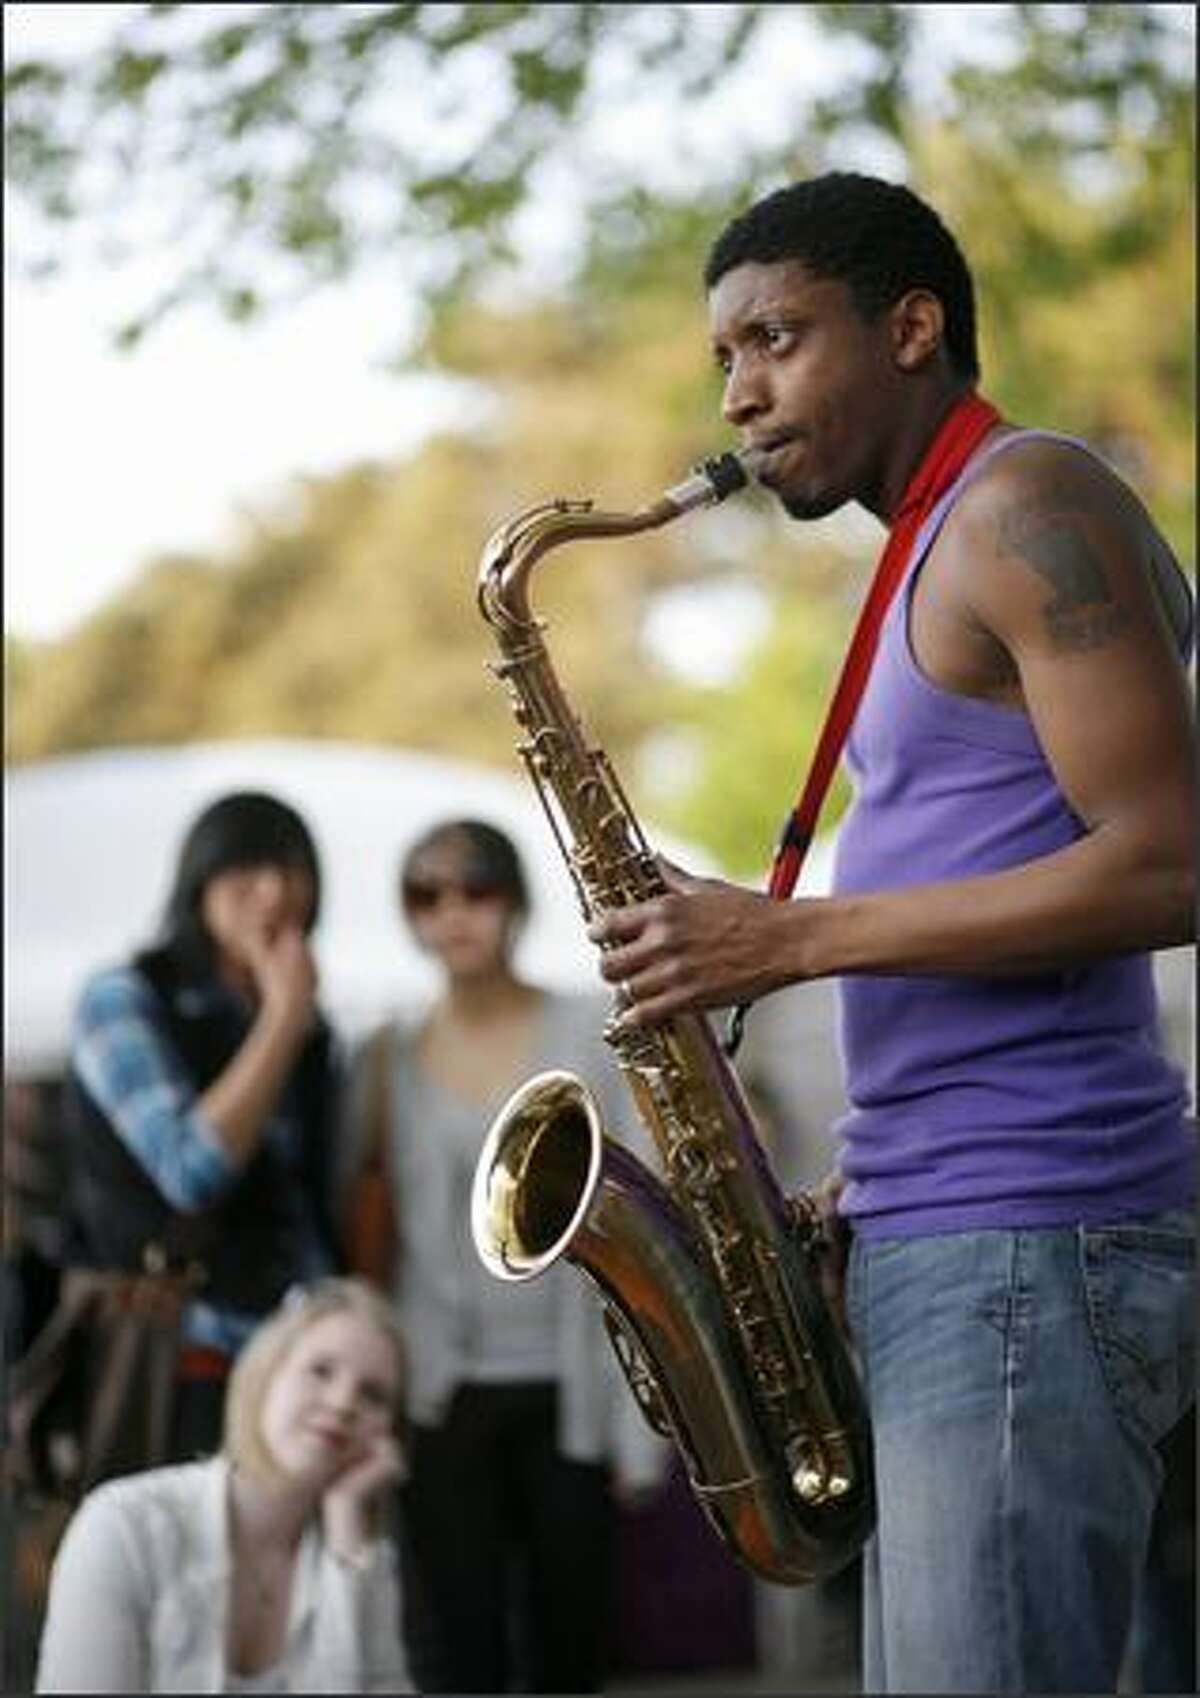 Javon Miller from Bellingham plays the sax with his musical group.